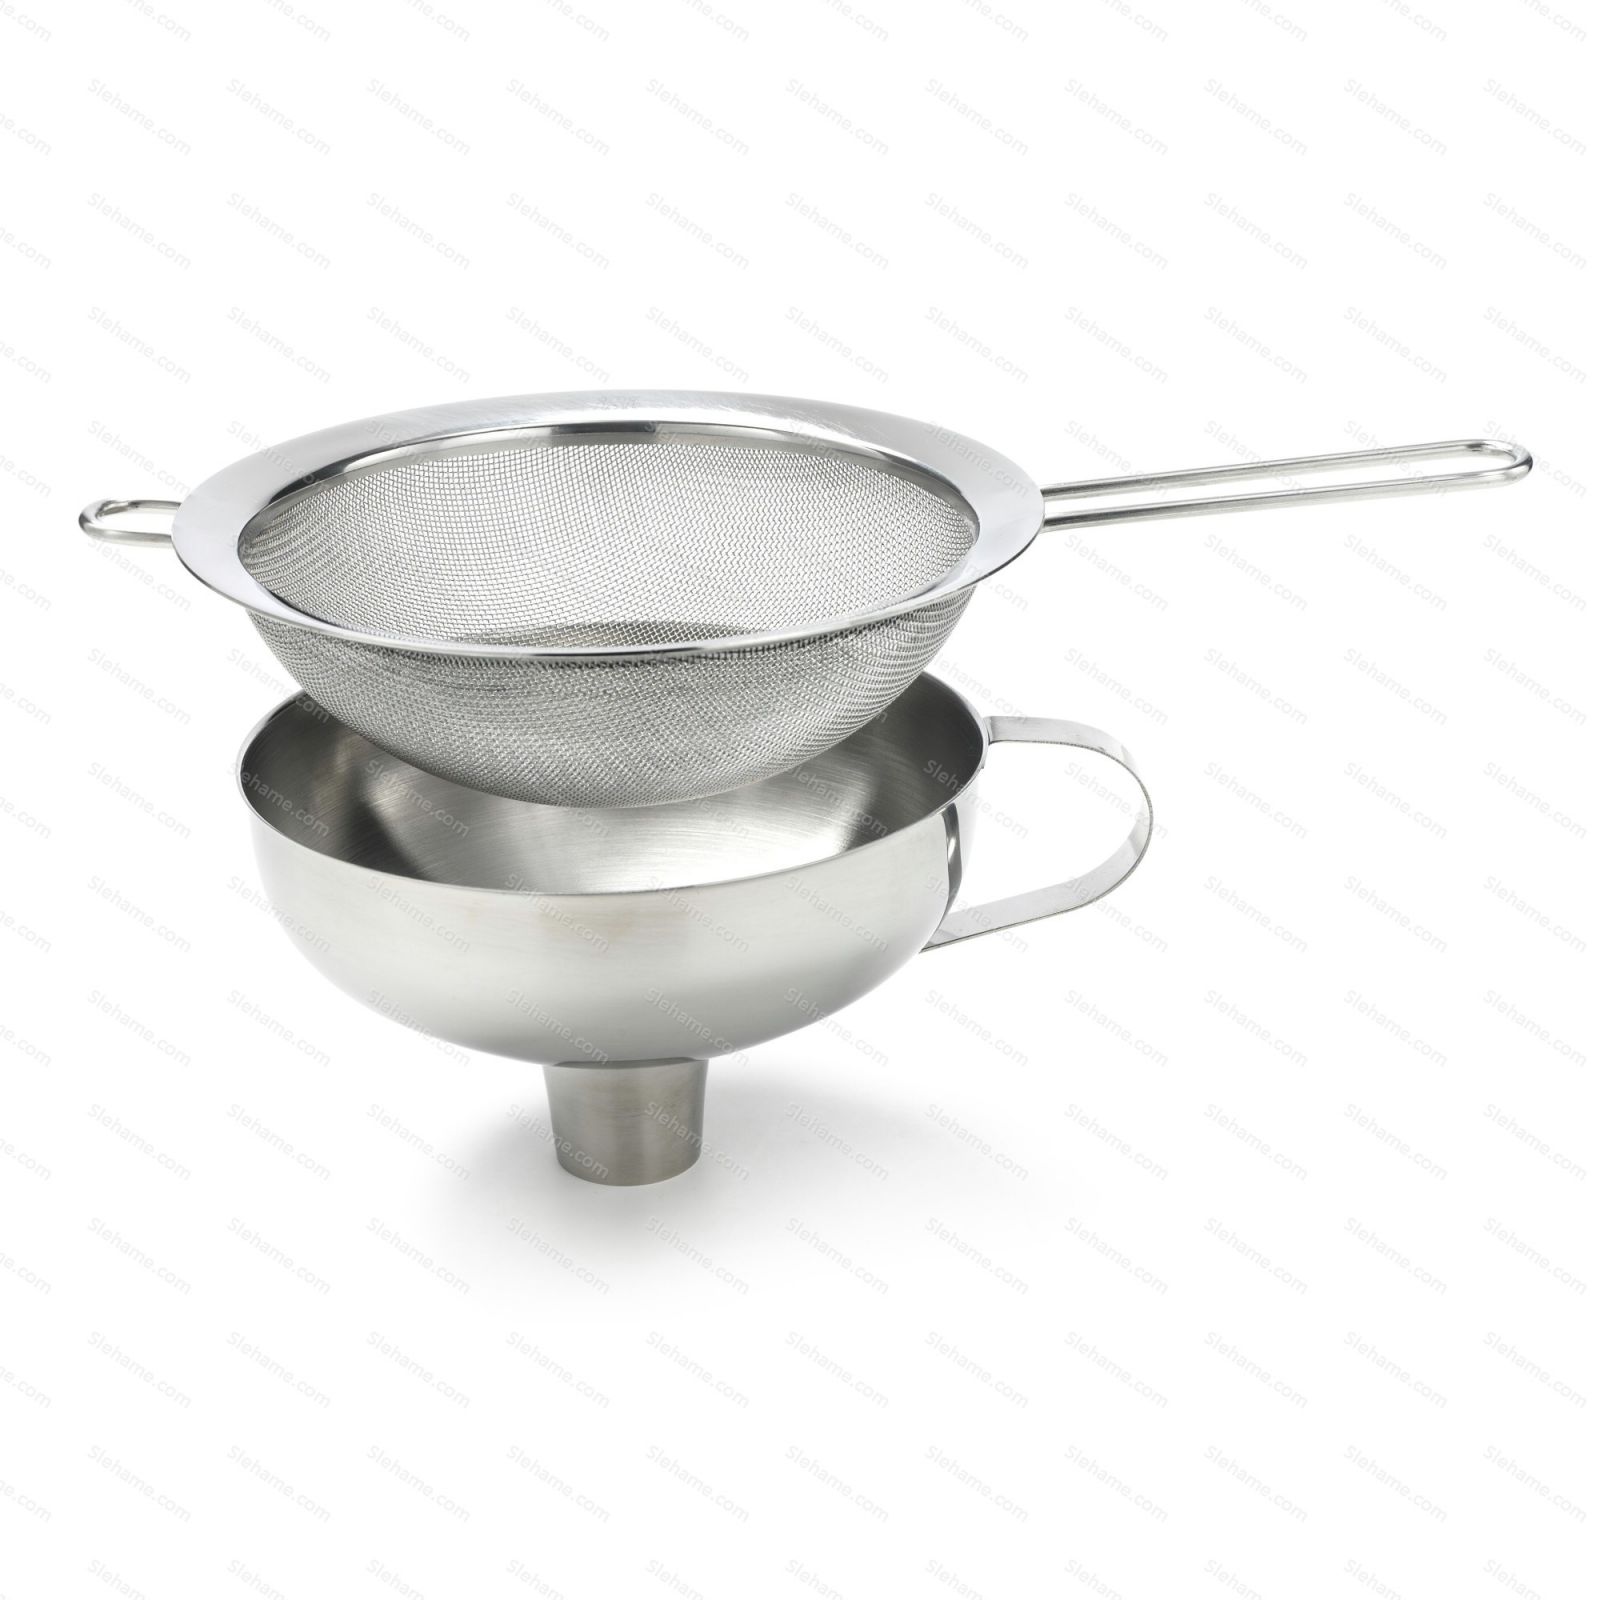 iSi Funnel and Sieve - front view